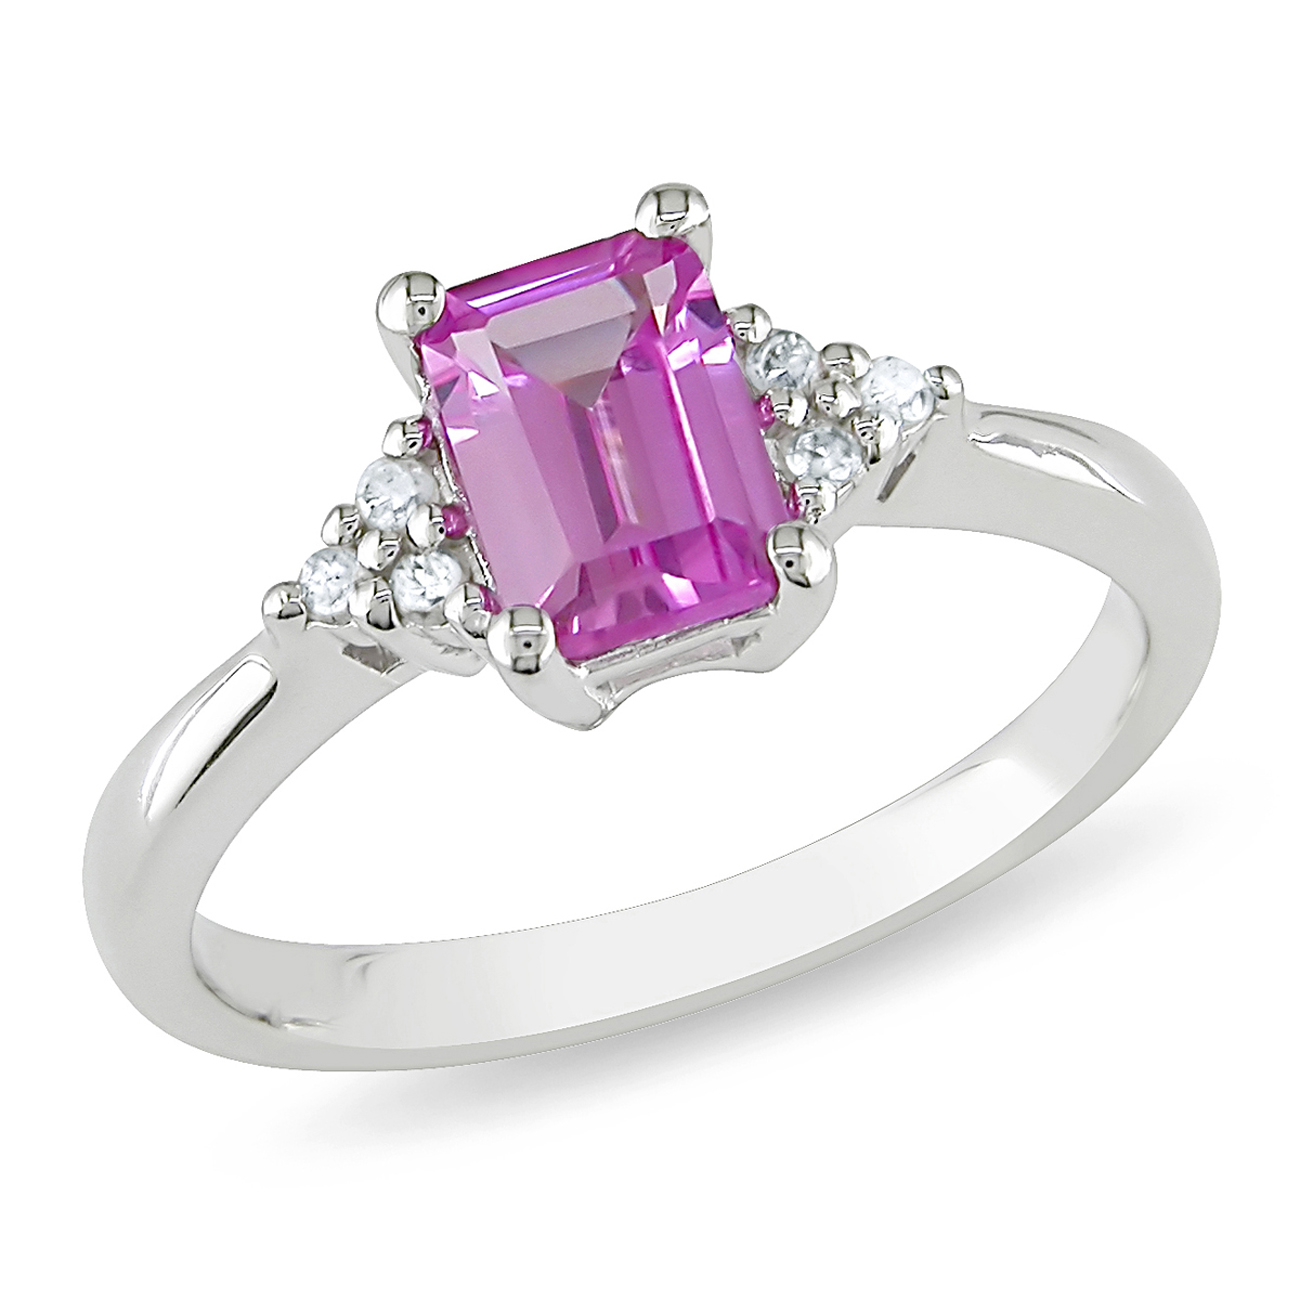 Amour 1/10 Carat T.W. Diamond and 1.59 Carat Created Pink Sapphire Fashion Ring in Sterling Silver